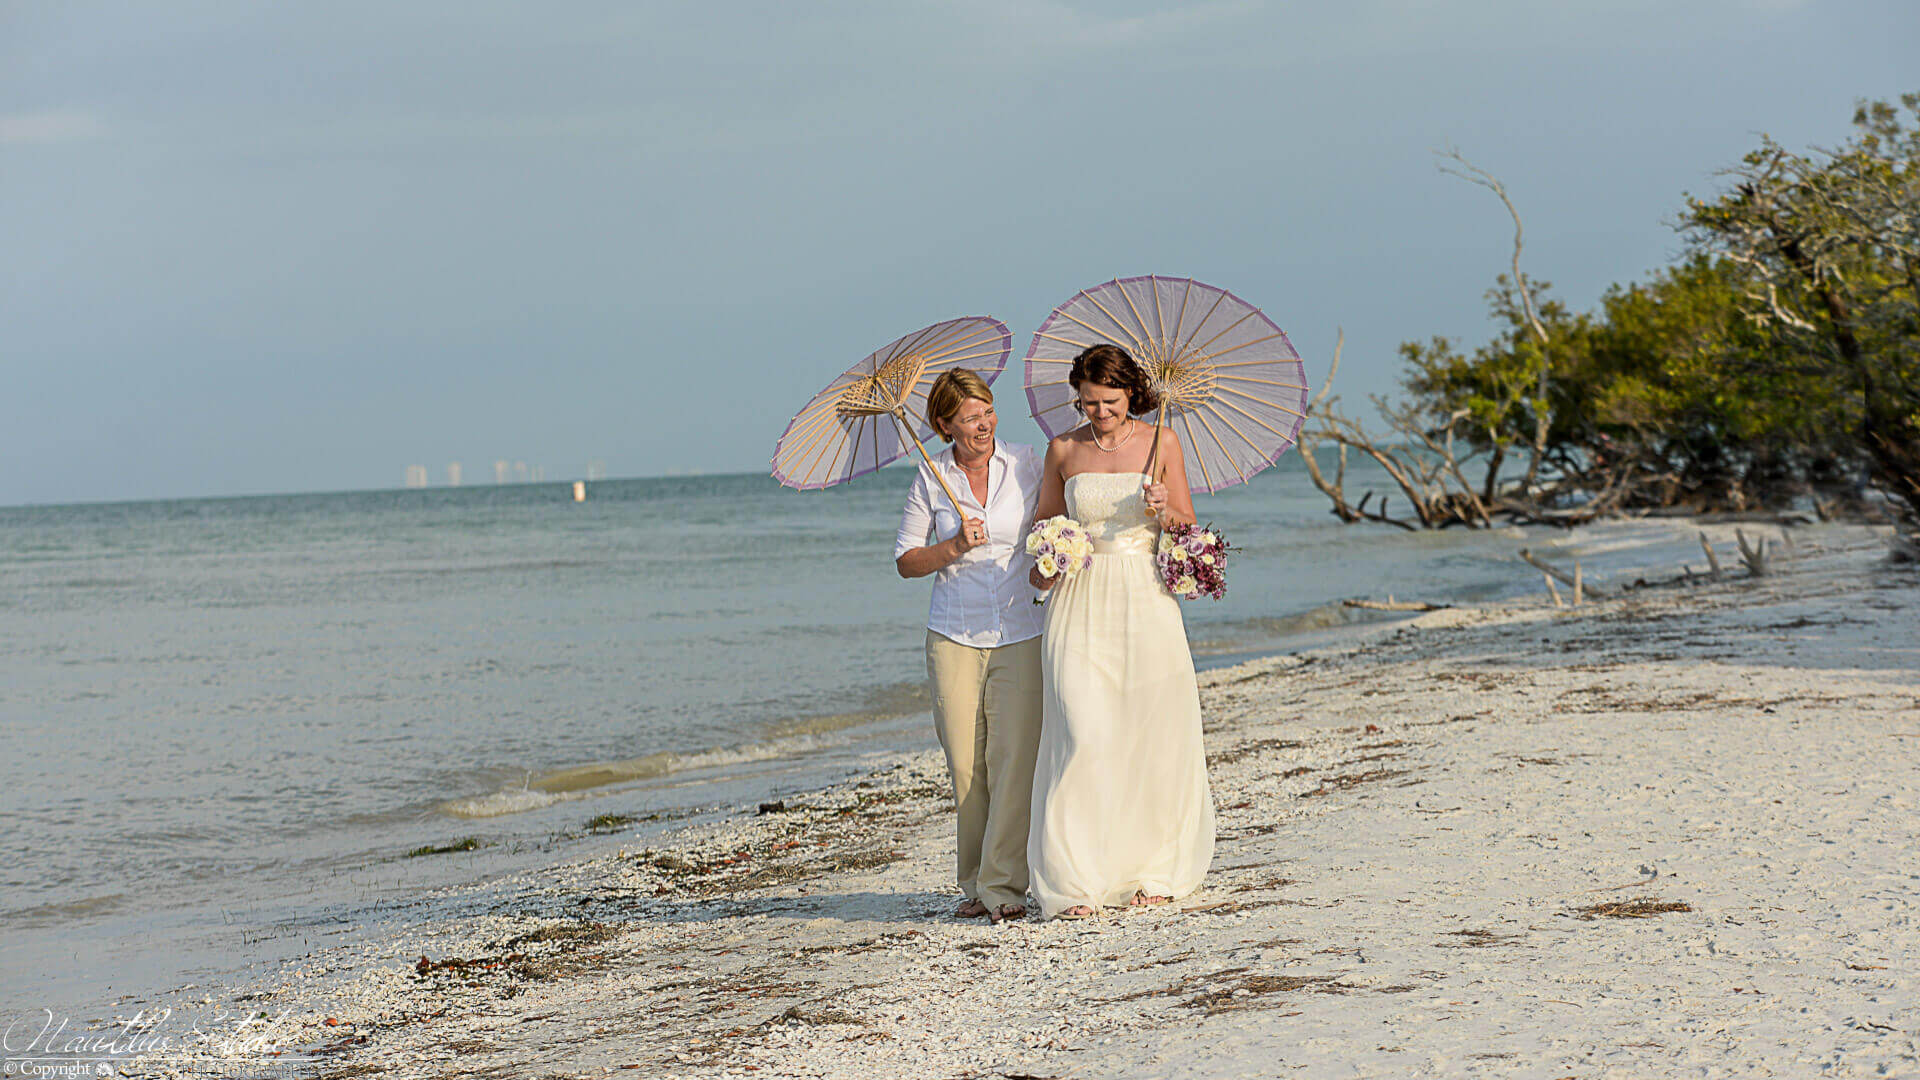 Photo of gay wedding in Sanibel Island showing two women with parasols